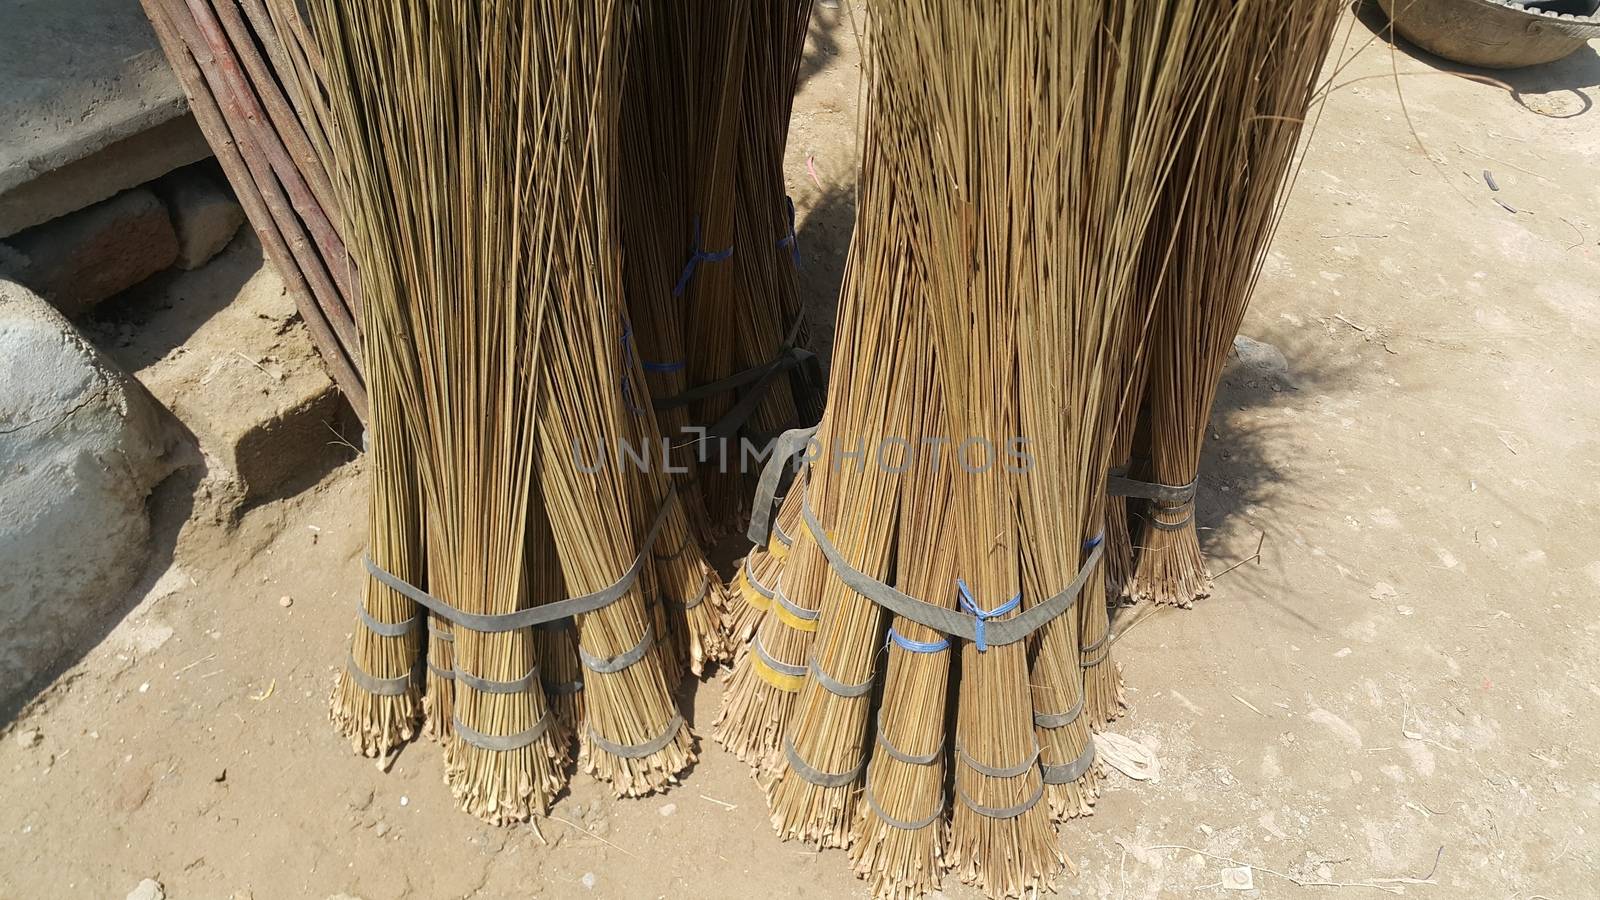 Bunch of brown colored straw broom. Old style broom used for housekeeping in rural area in Asian countries.